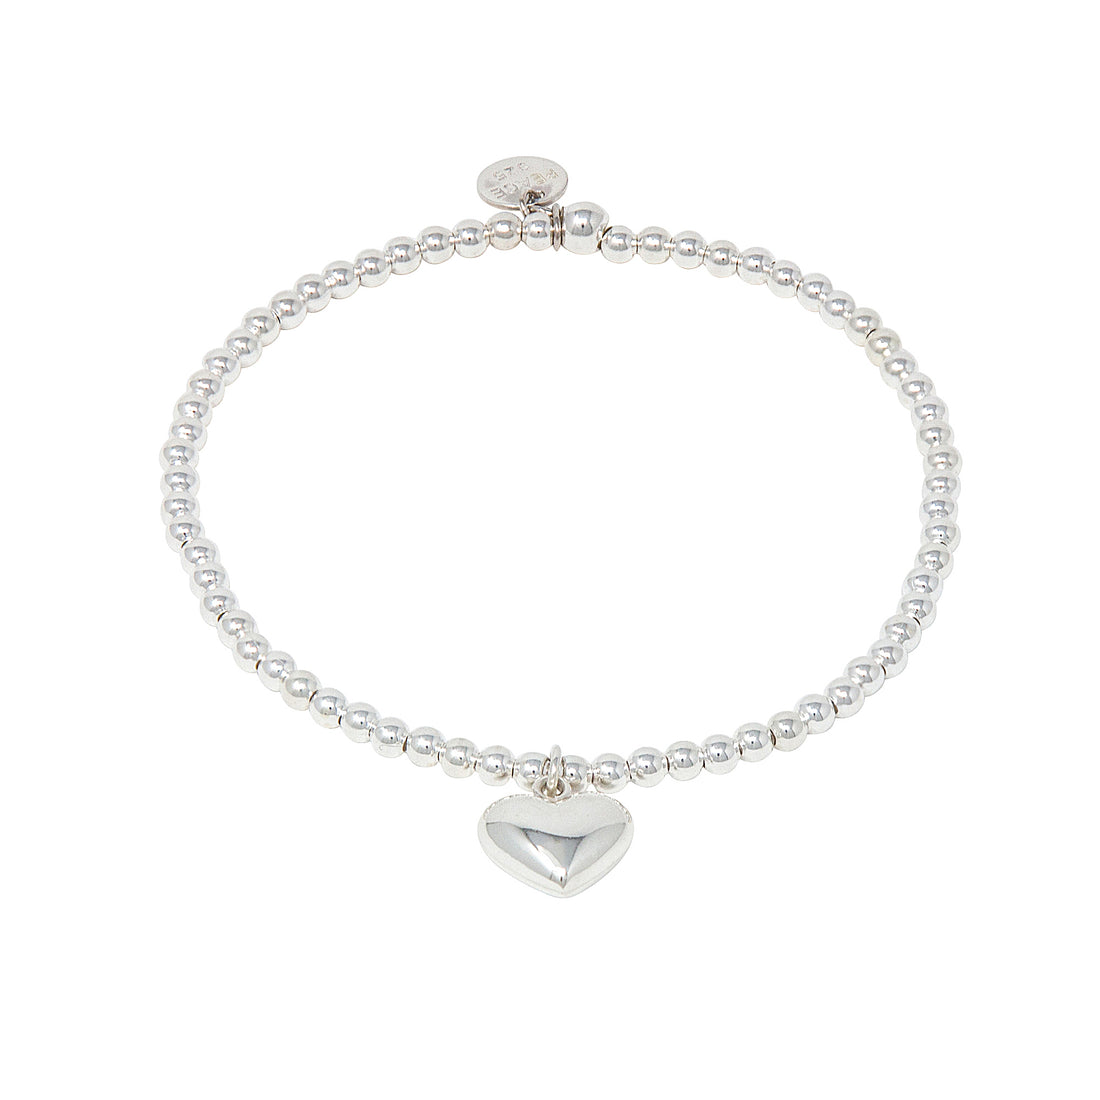 Bead ball stretch bracelet with a puffed heart charm with a high polish finish.